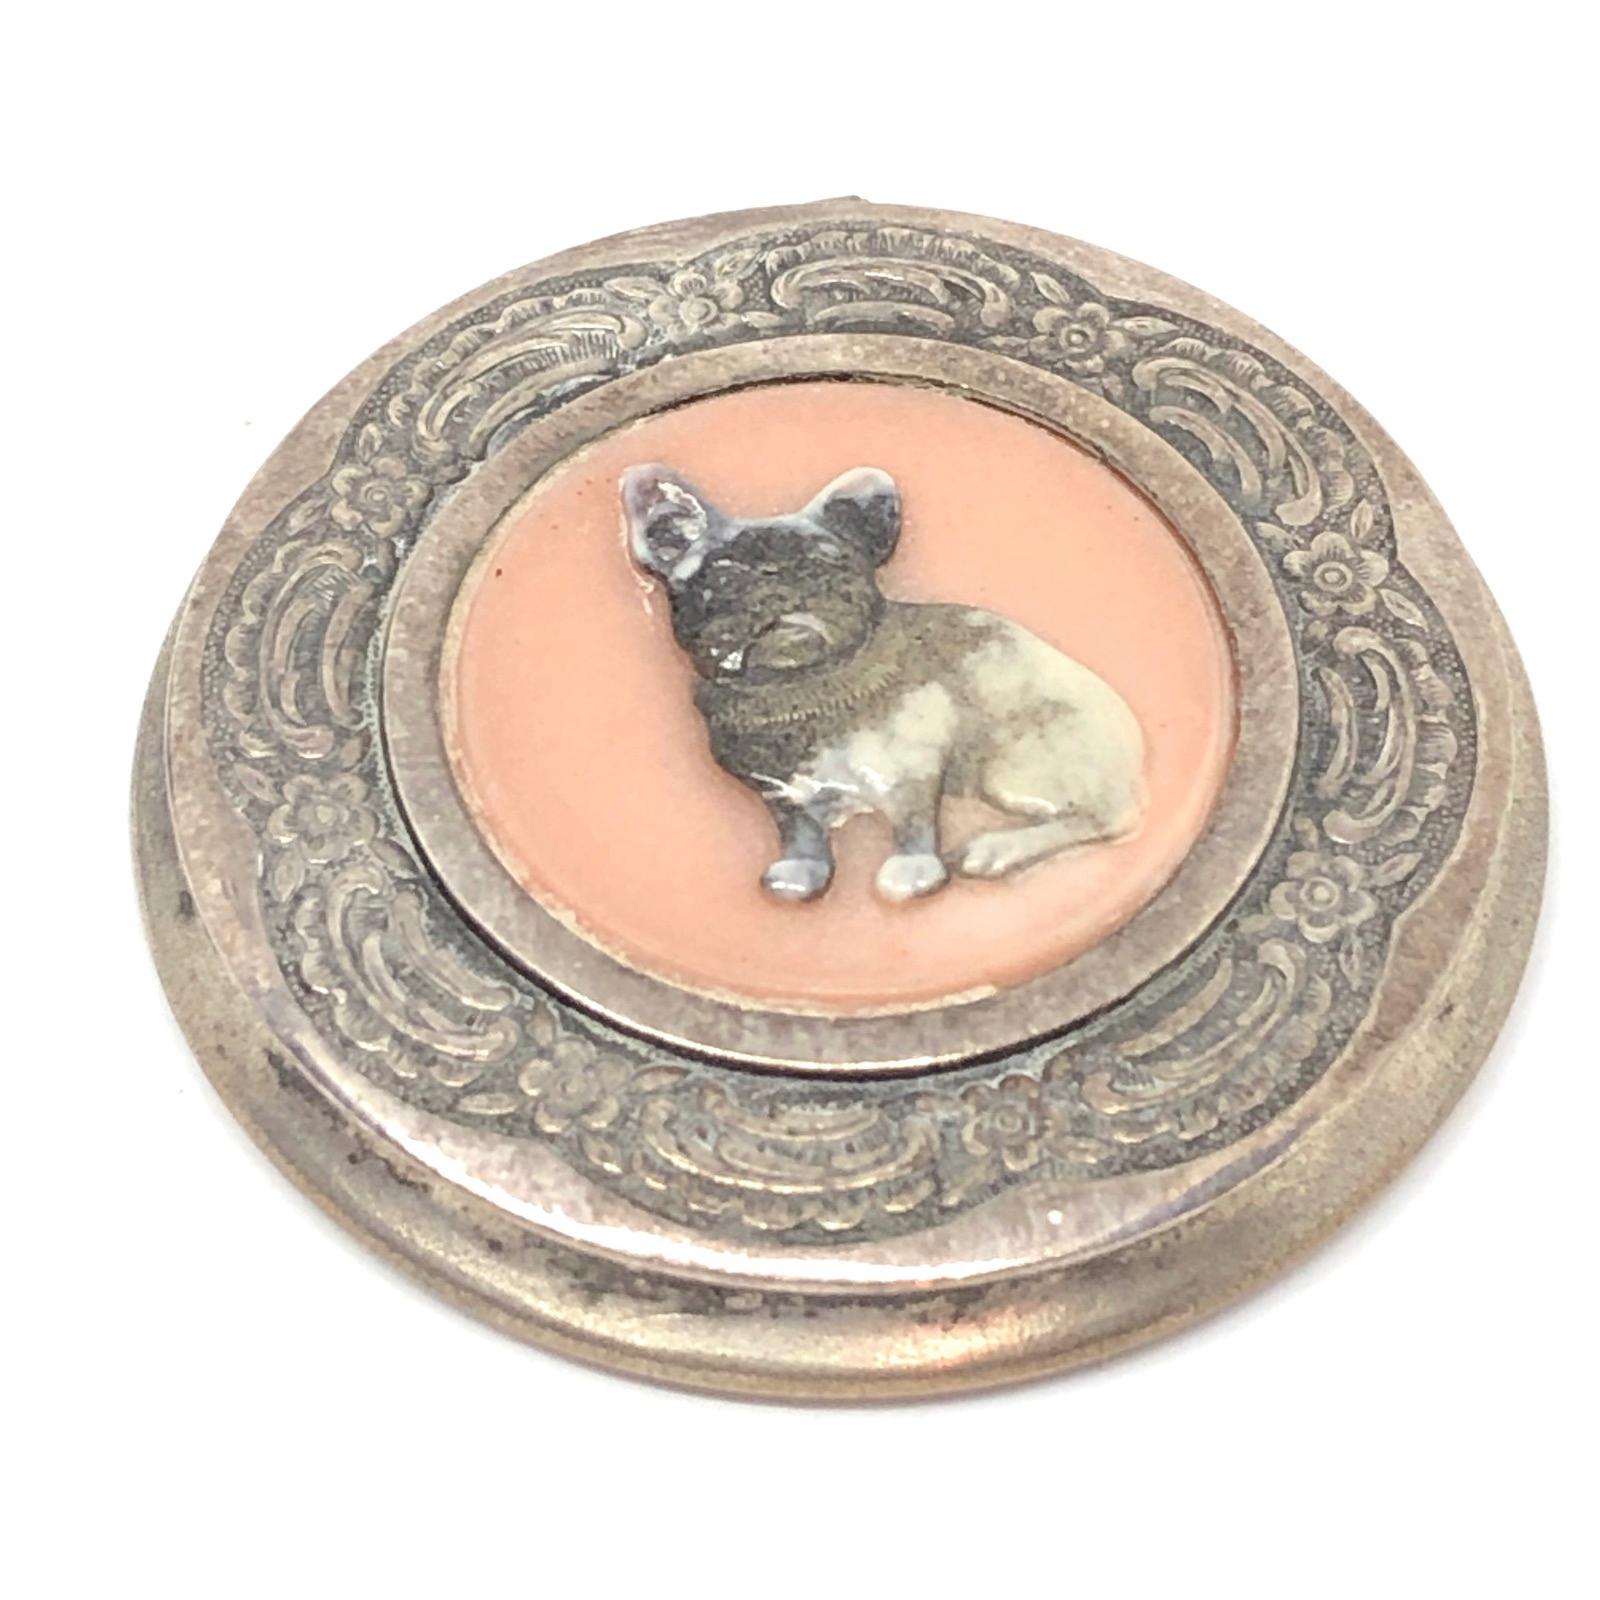 Classic early 20th century German motif Ladies Compact, with a nice bulldog motif. Nice addition to your collection of bulldog items. It is not marked.